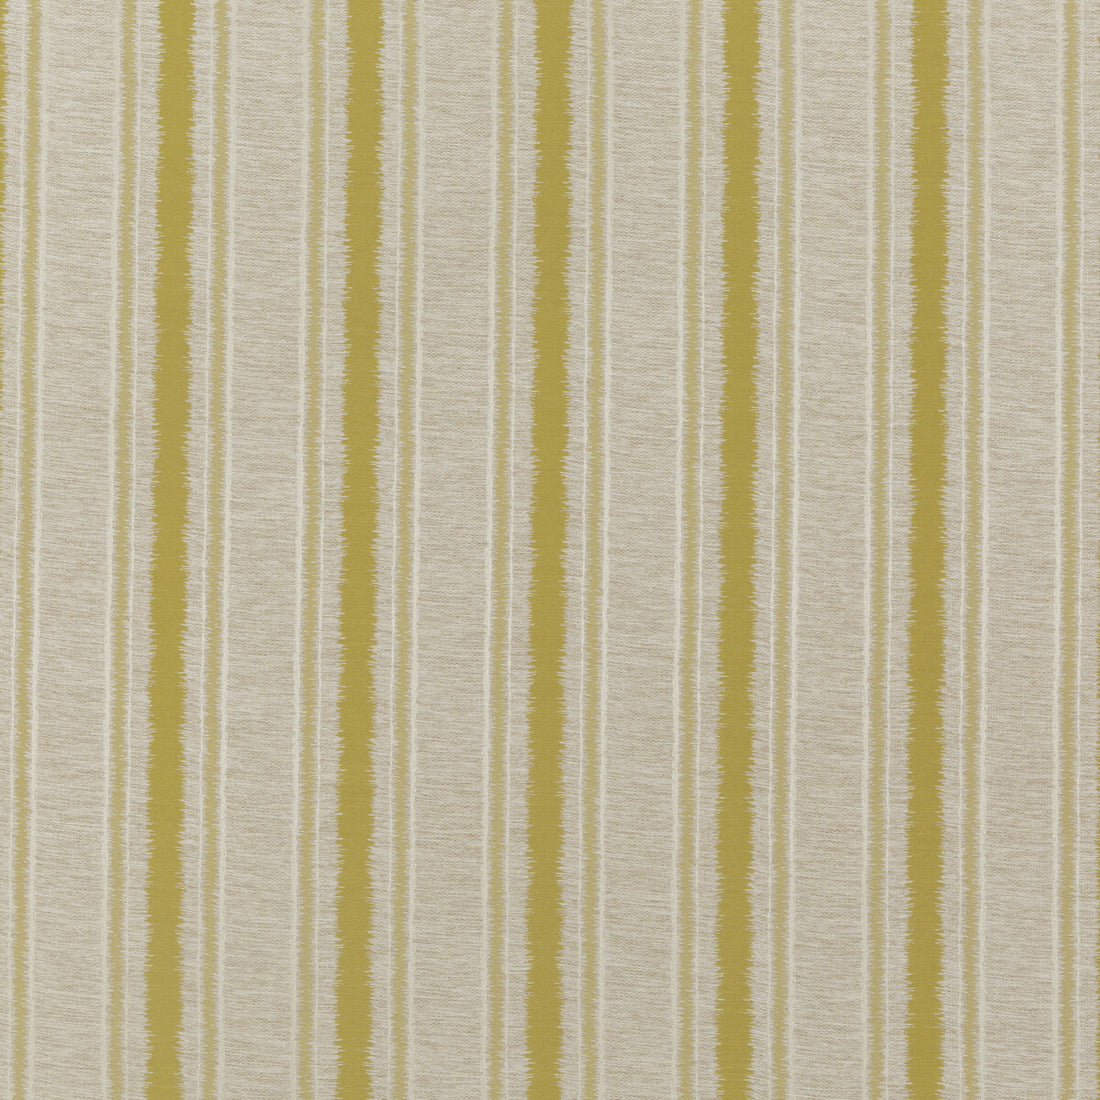 Rattan Stripe fabric in citrus color - pattern ED85282.748.0 - by Threads in the Meridian collection